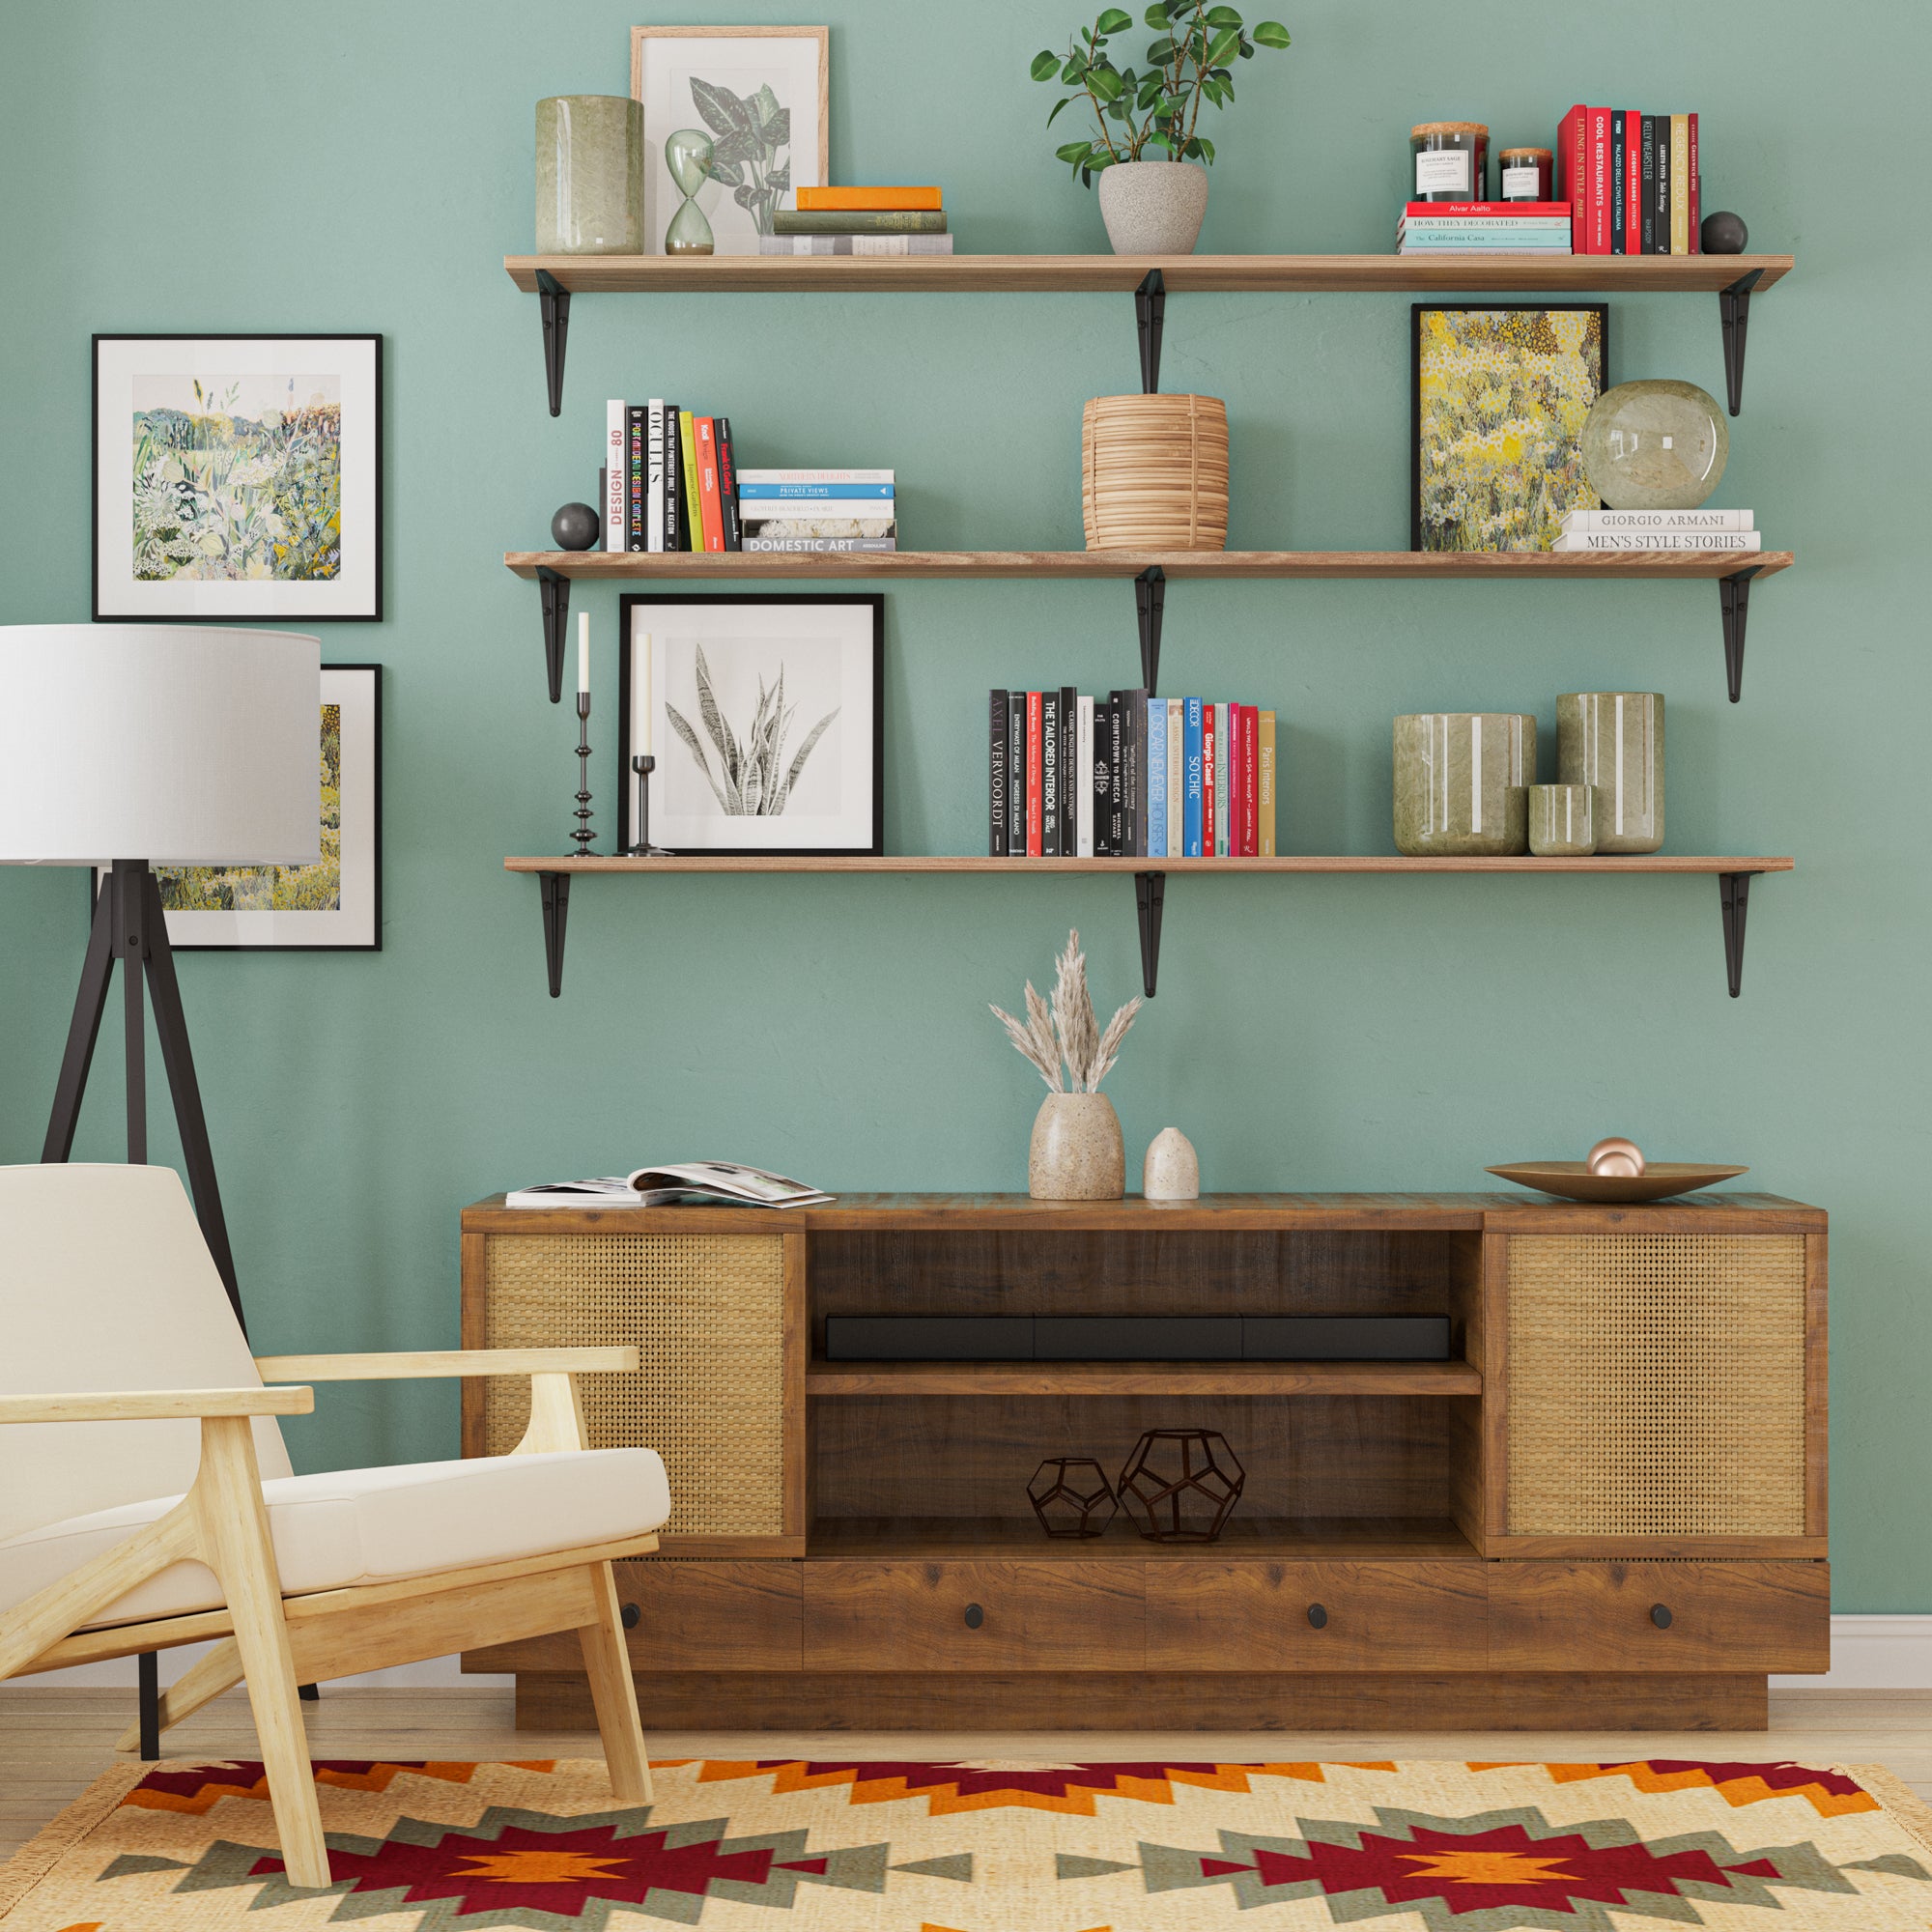 Vibrant living area with shelving unit wall mounted burnt over a wooden console, decorated with books, art, and various decor against a green wall.